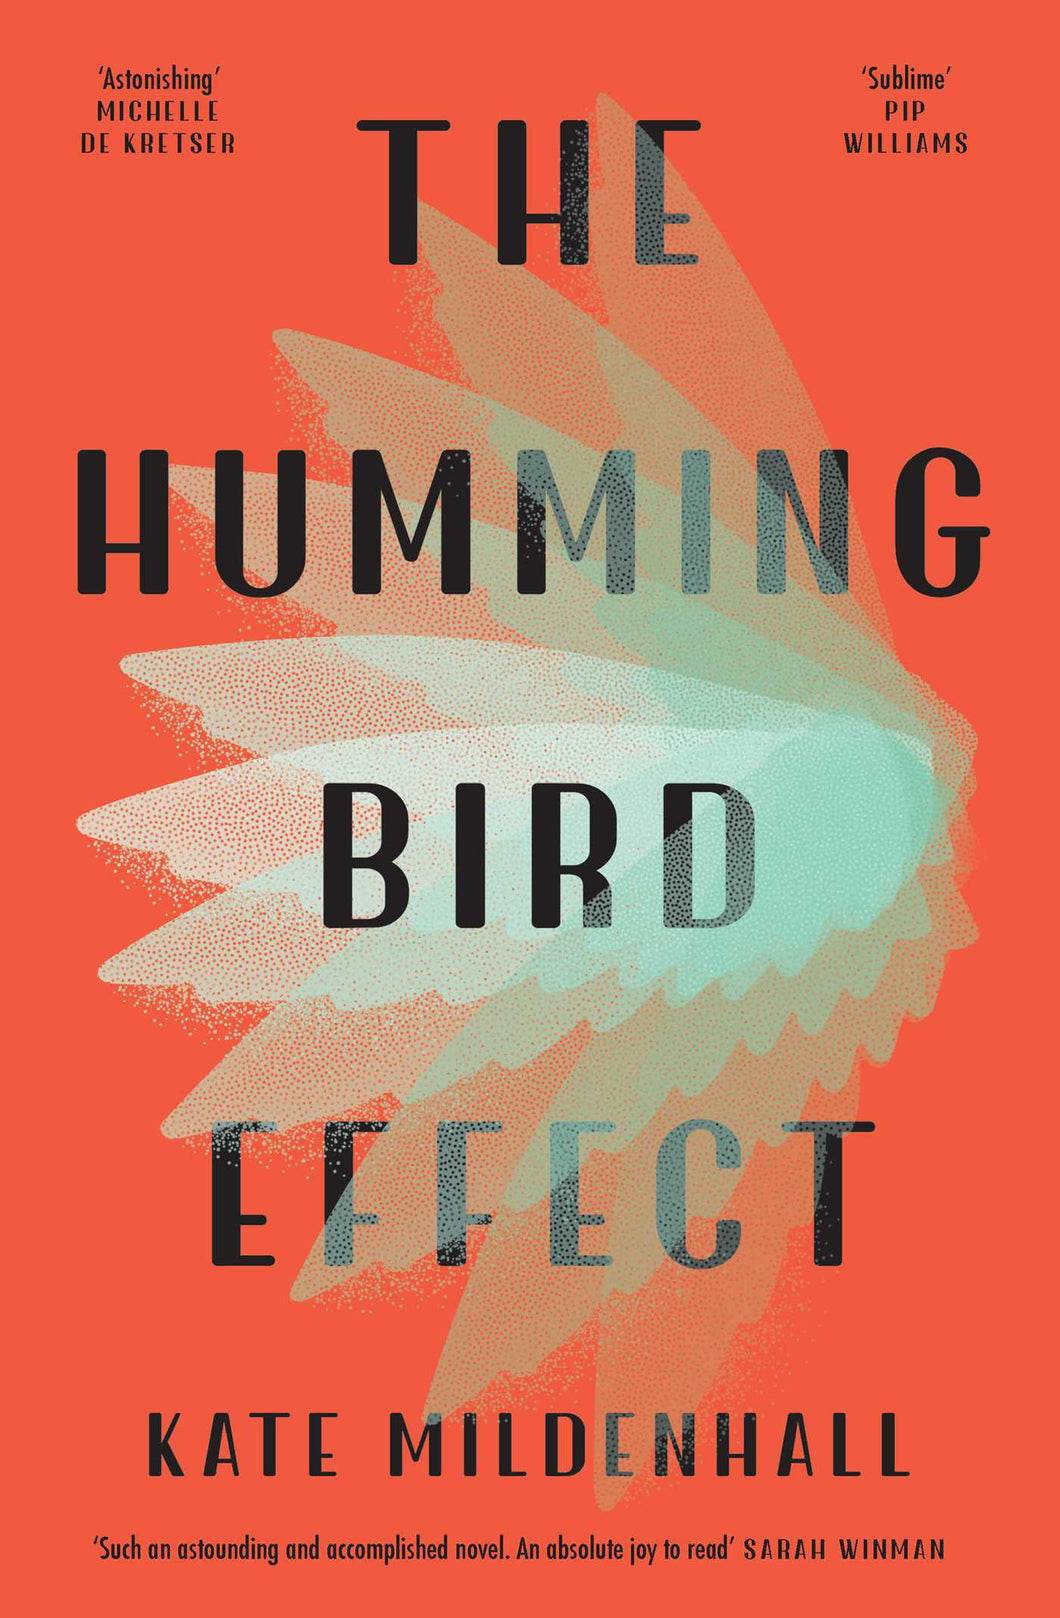 The Hummingbird Effect by Kate Mildenhall